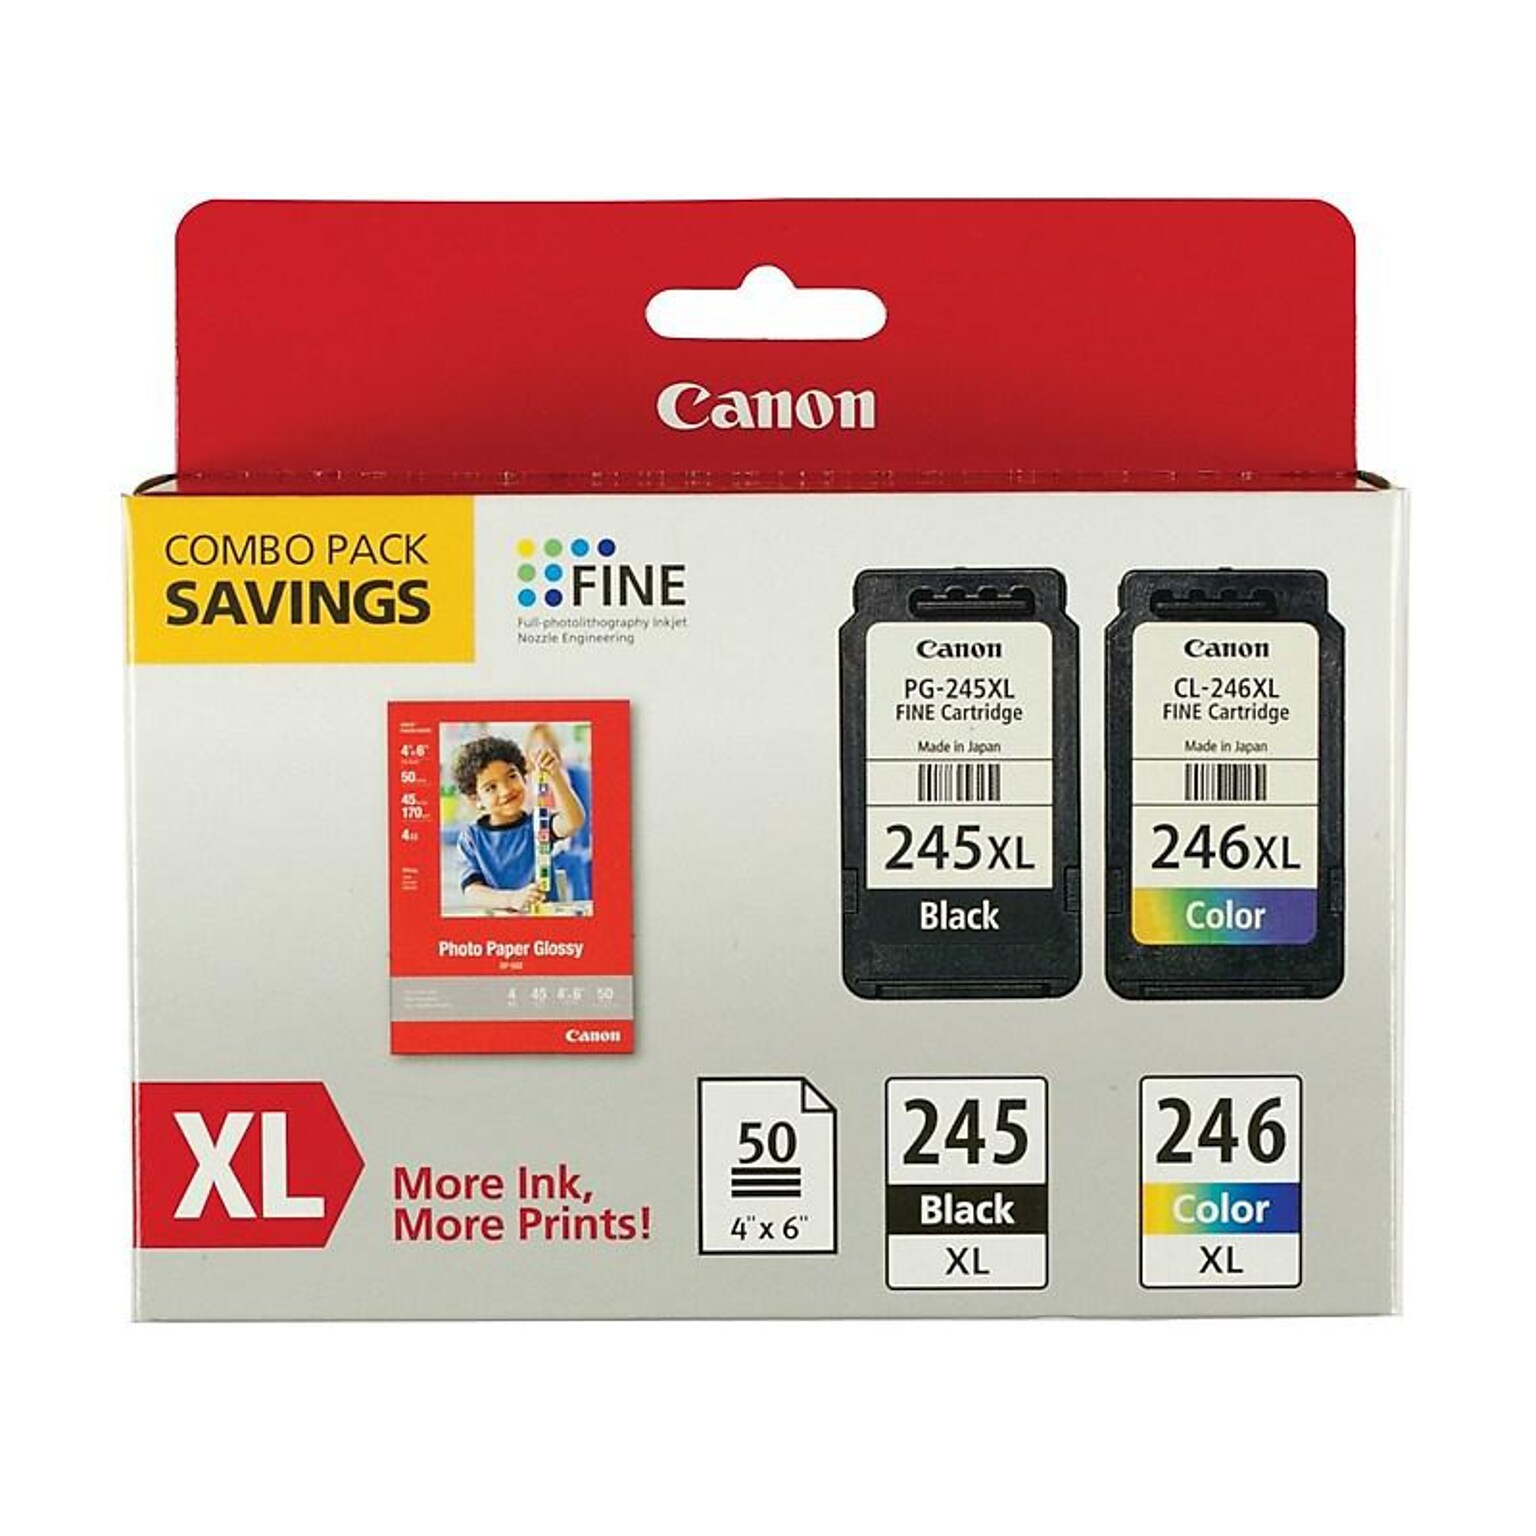 Canon 245XL/246XL Black and TriColor Ink Cartridge, 2/Pack with 4x6 photo paper (8278B023)